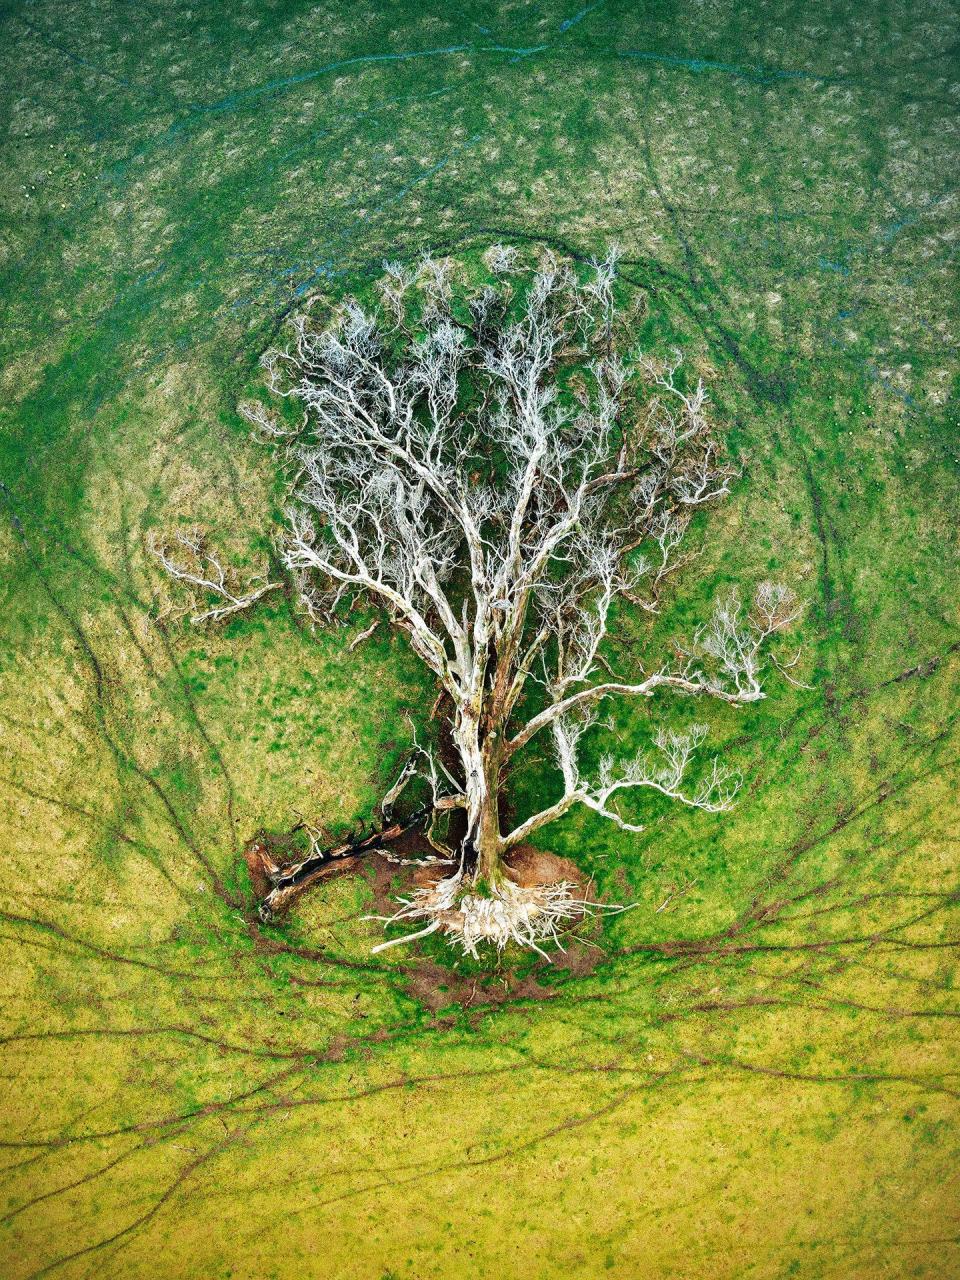 The gold winner in the plants and fungi category: ‘Tree of life’ – a fallen Eucalyptus tree in Mount Barker, Western Australia.